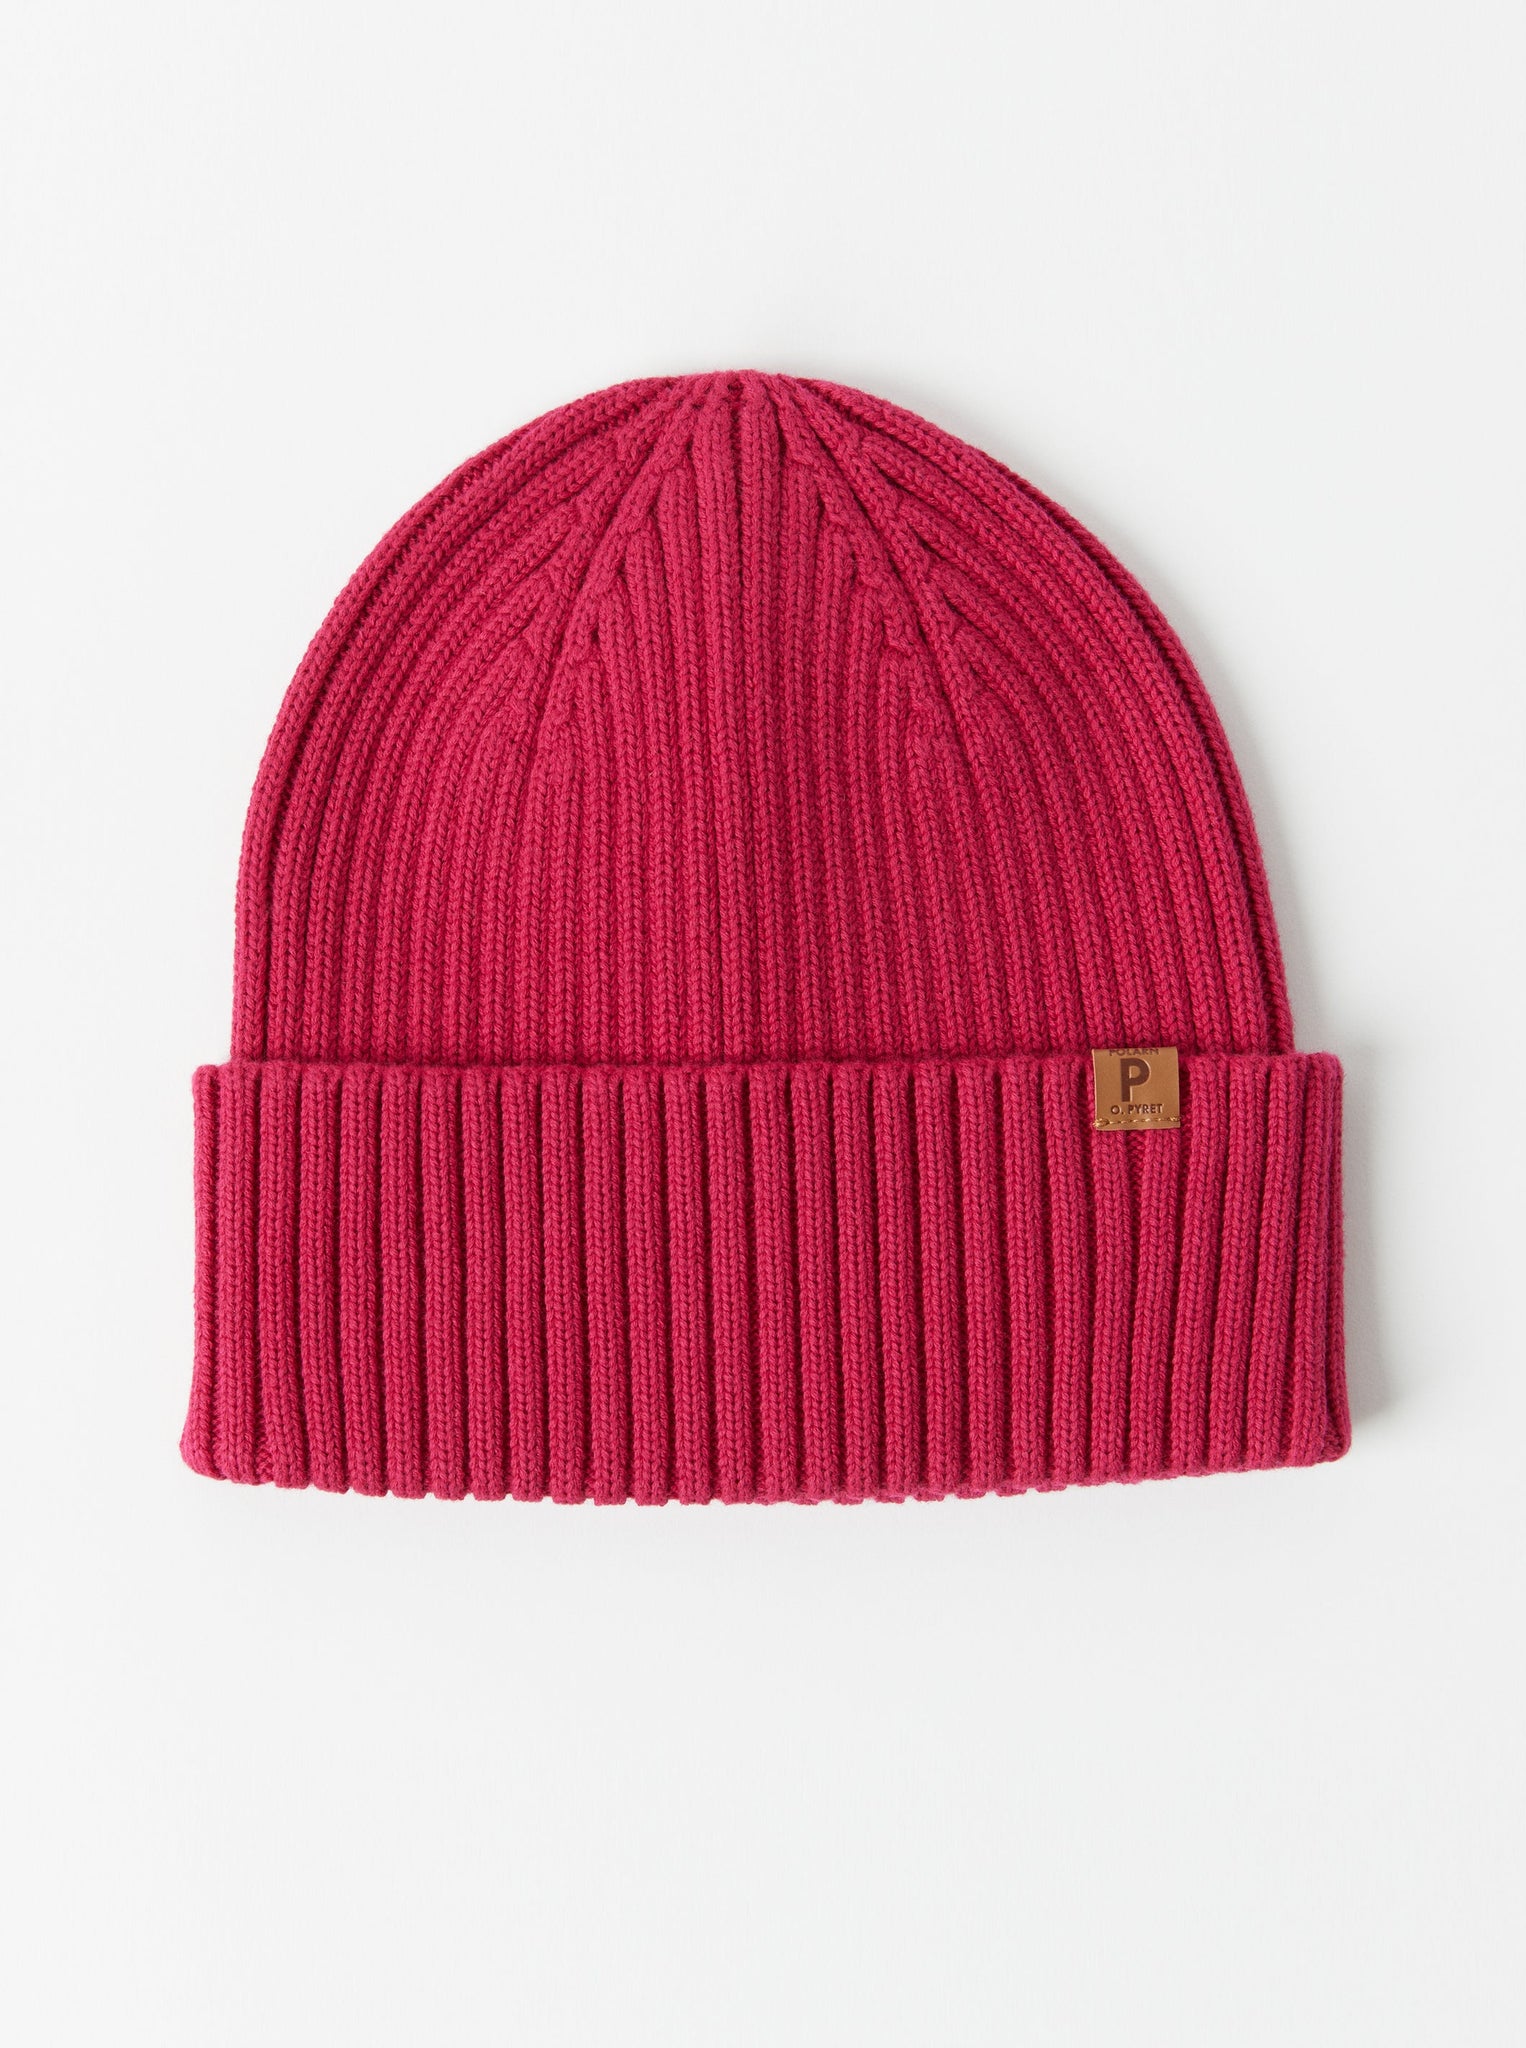 Red Kids Knitted Hat from the Polarn O. Pyret kidswear collection. The best ethical kids outerwear.